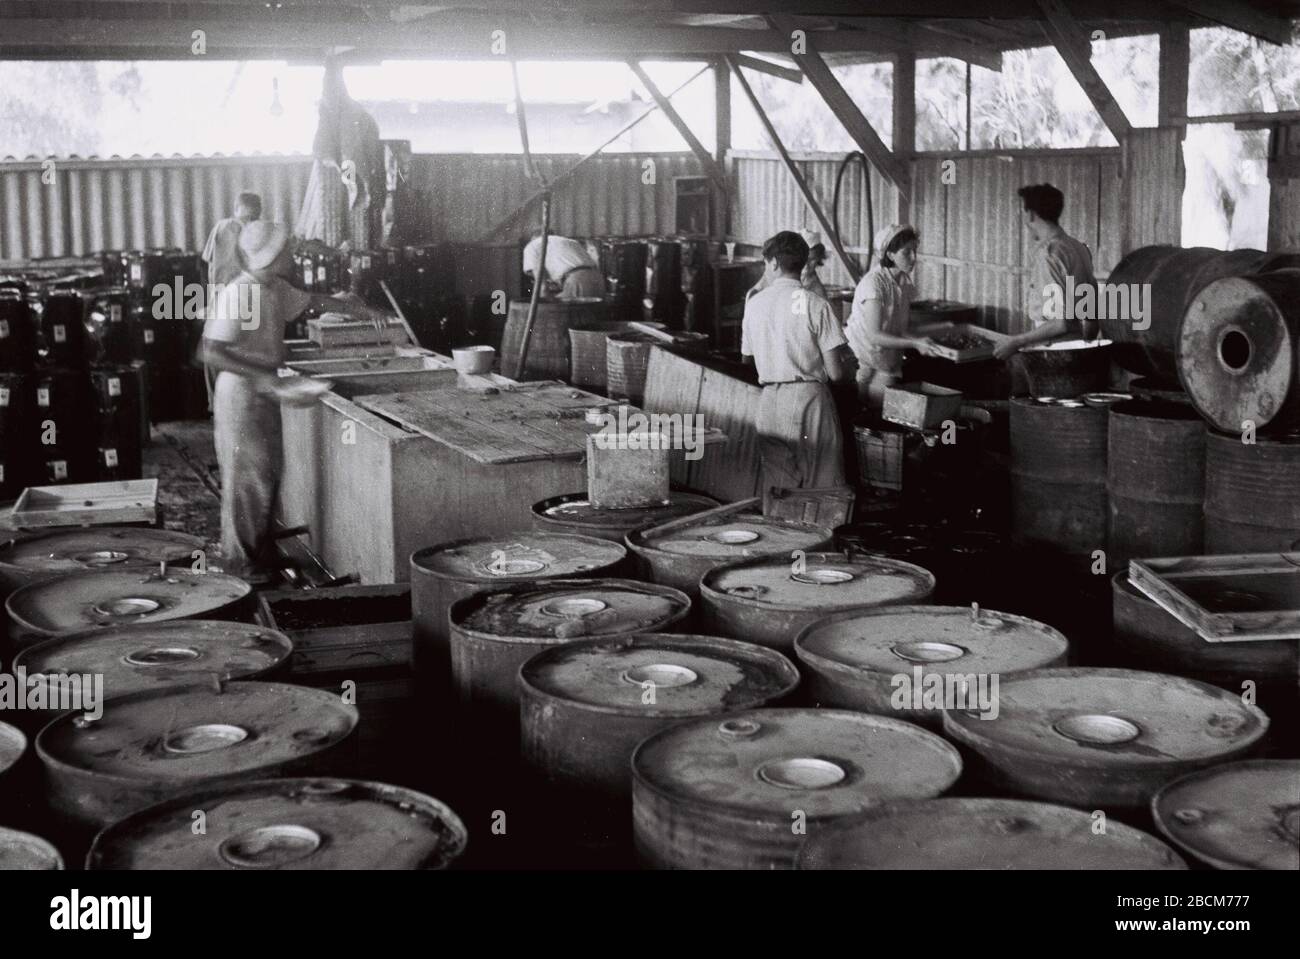 English The Edible Oil Plant At Kibbutz Degania B U U U C U U E O O U E Ss O E I I I O I E 30 July 1945 This Is Available From National Photo Collection Of Israel Photography Dept Goverment Press Office